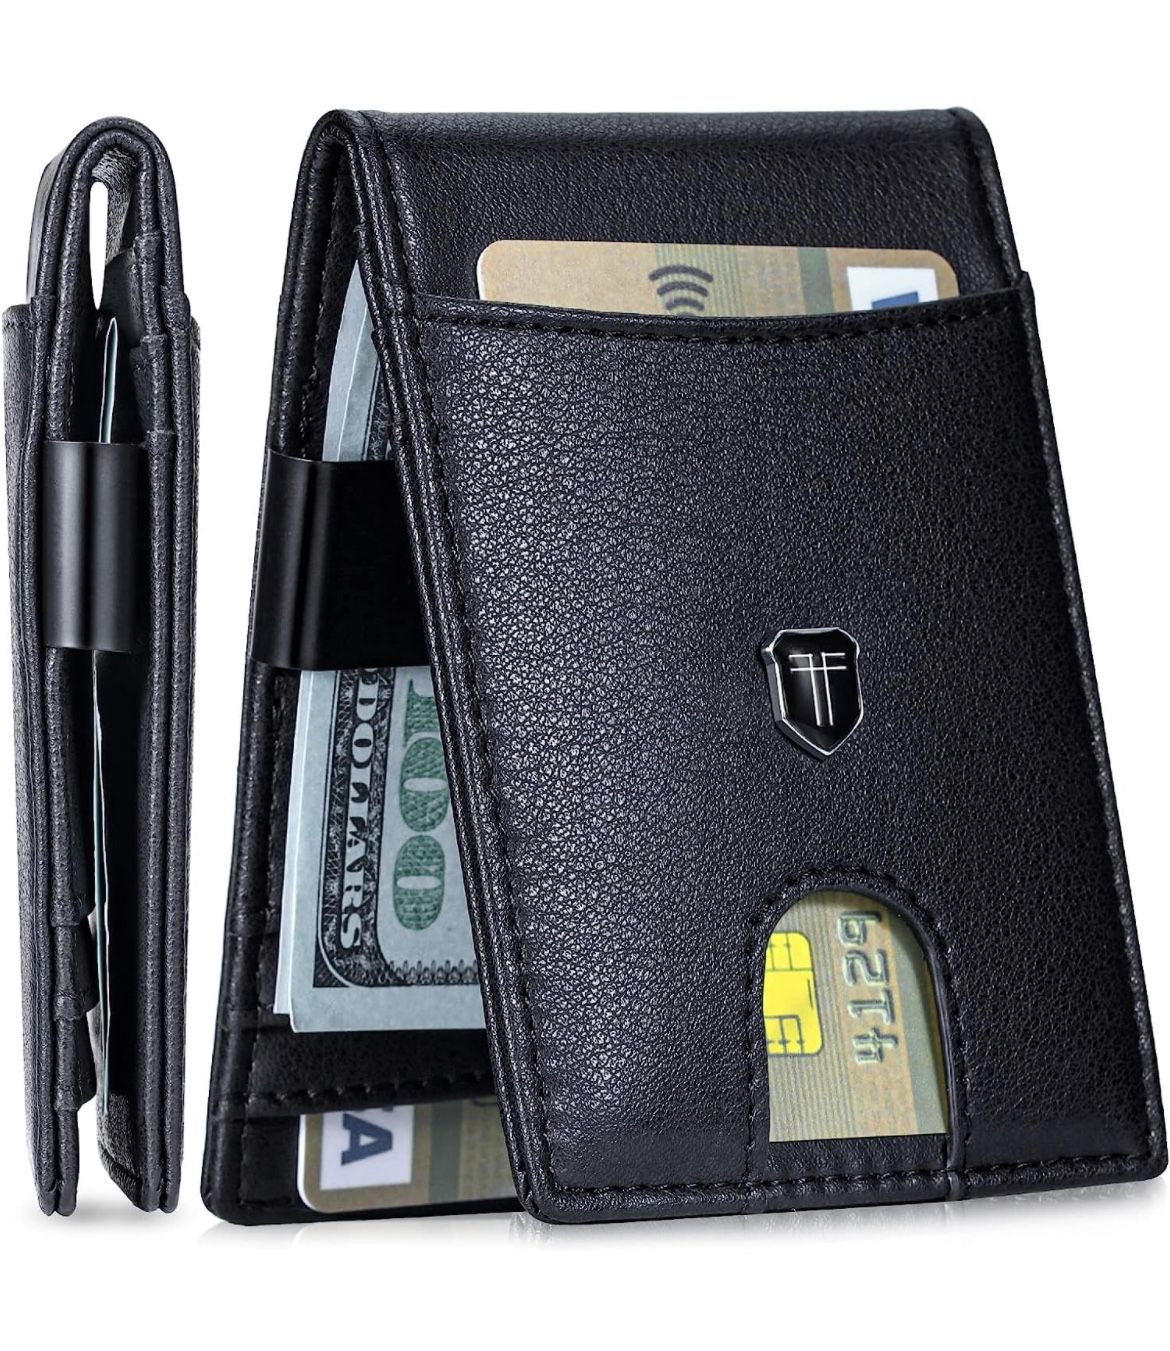 Toughergun Slim Wallet for Men Wallet with Money Clip RFID Wallet with ID Window Quick Card Front Pocket